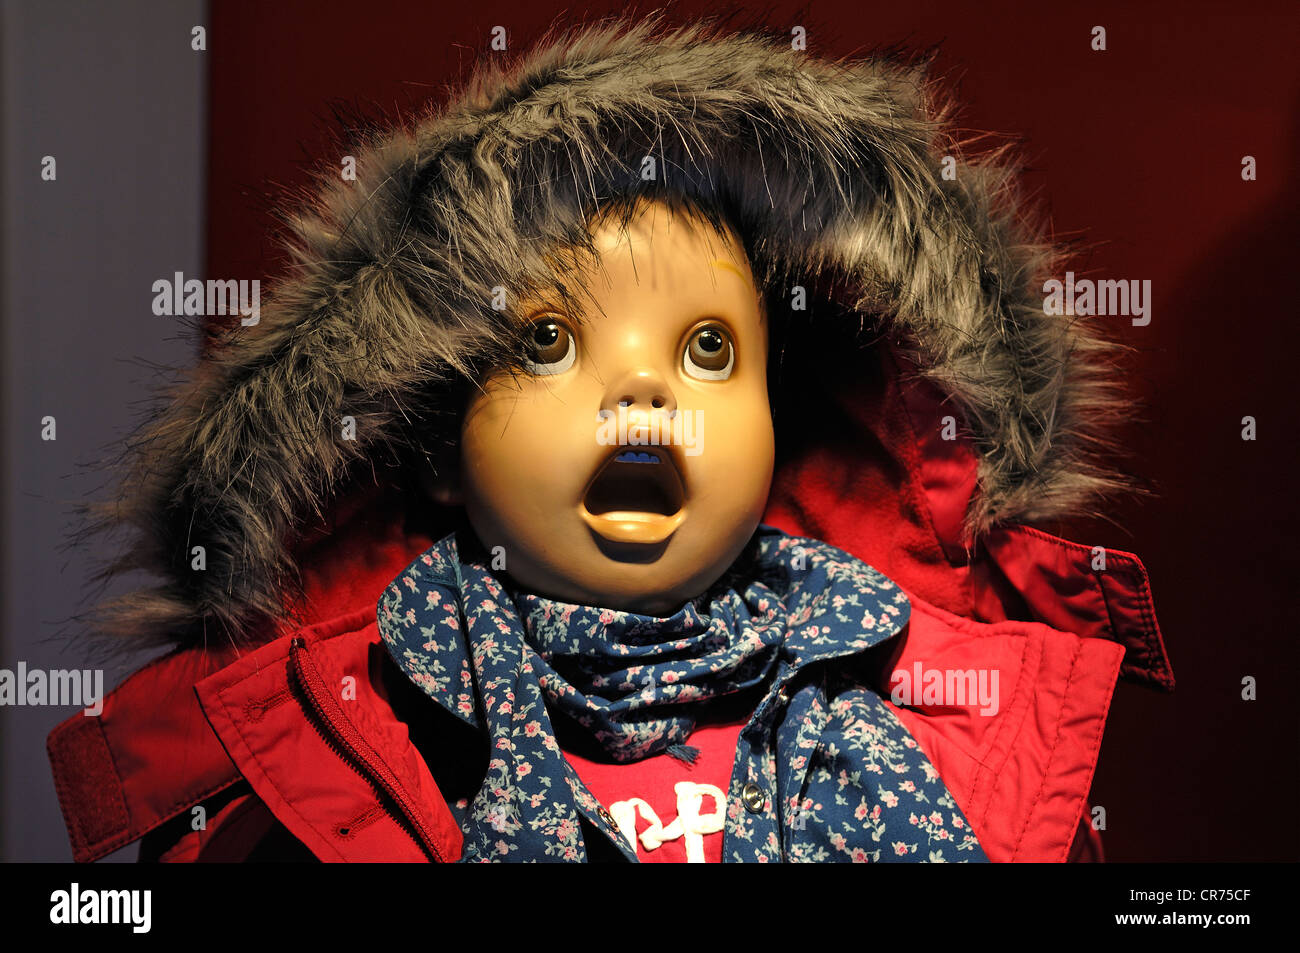 Astonished child mannequin with big eyes and open mouth in a fashion store, Fuerth, Middle Franconia, Bavaria, Germany, Europe Stock Photo